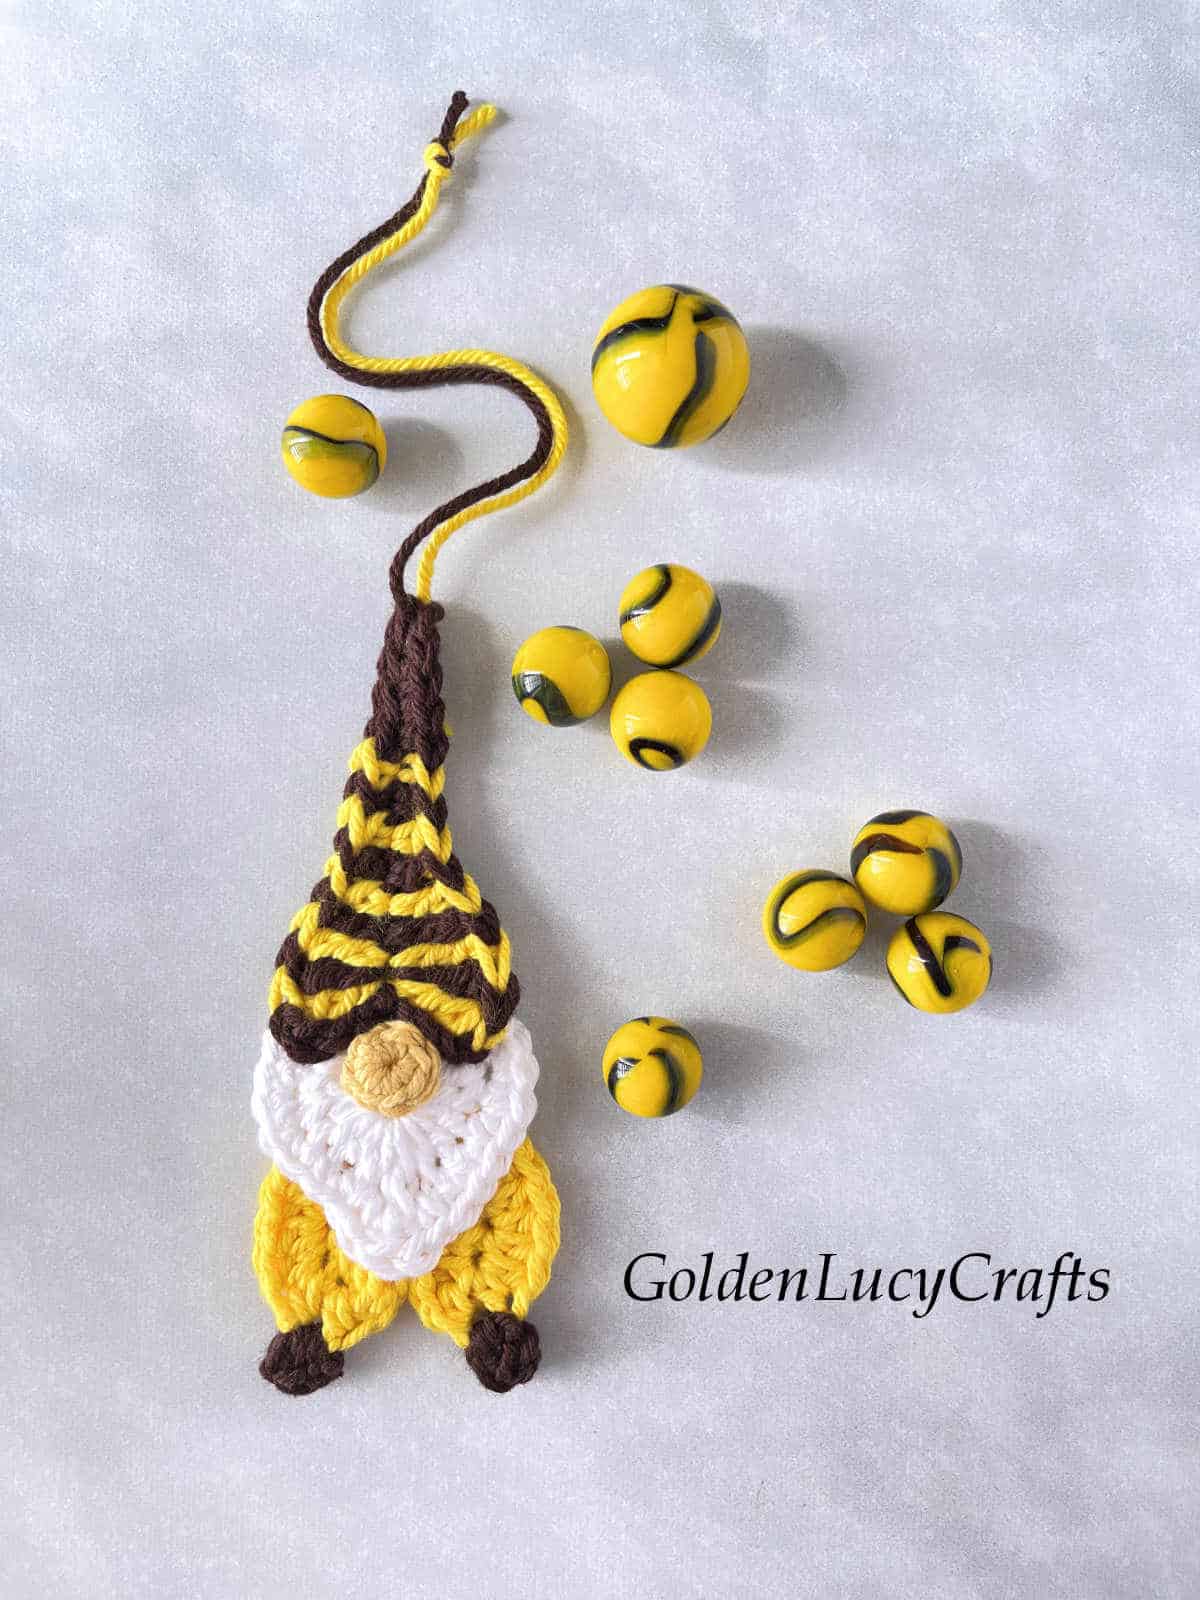 Crocheted bee gnome ornament made from hearts.